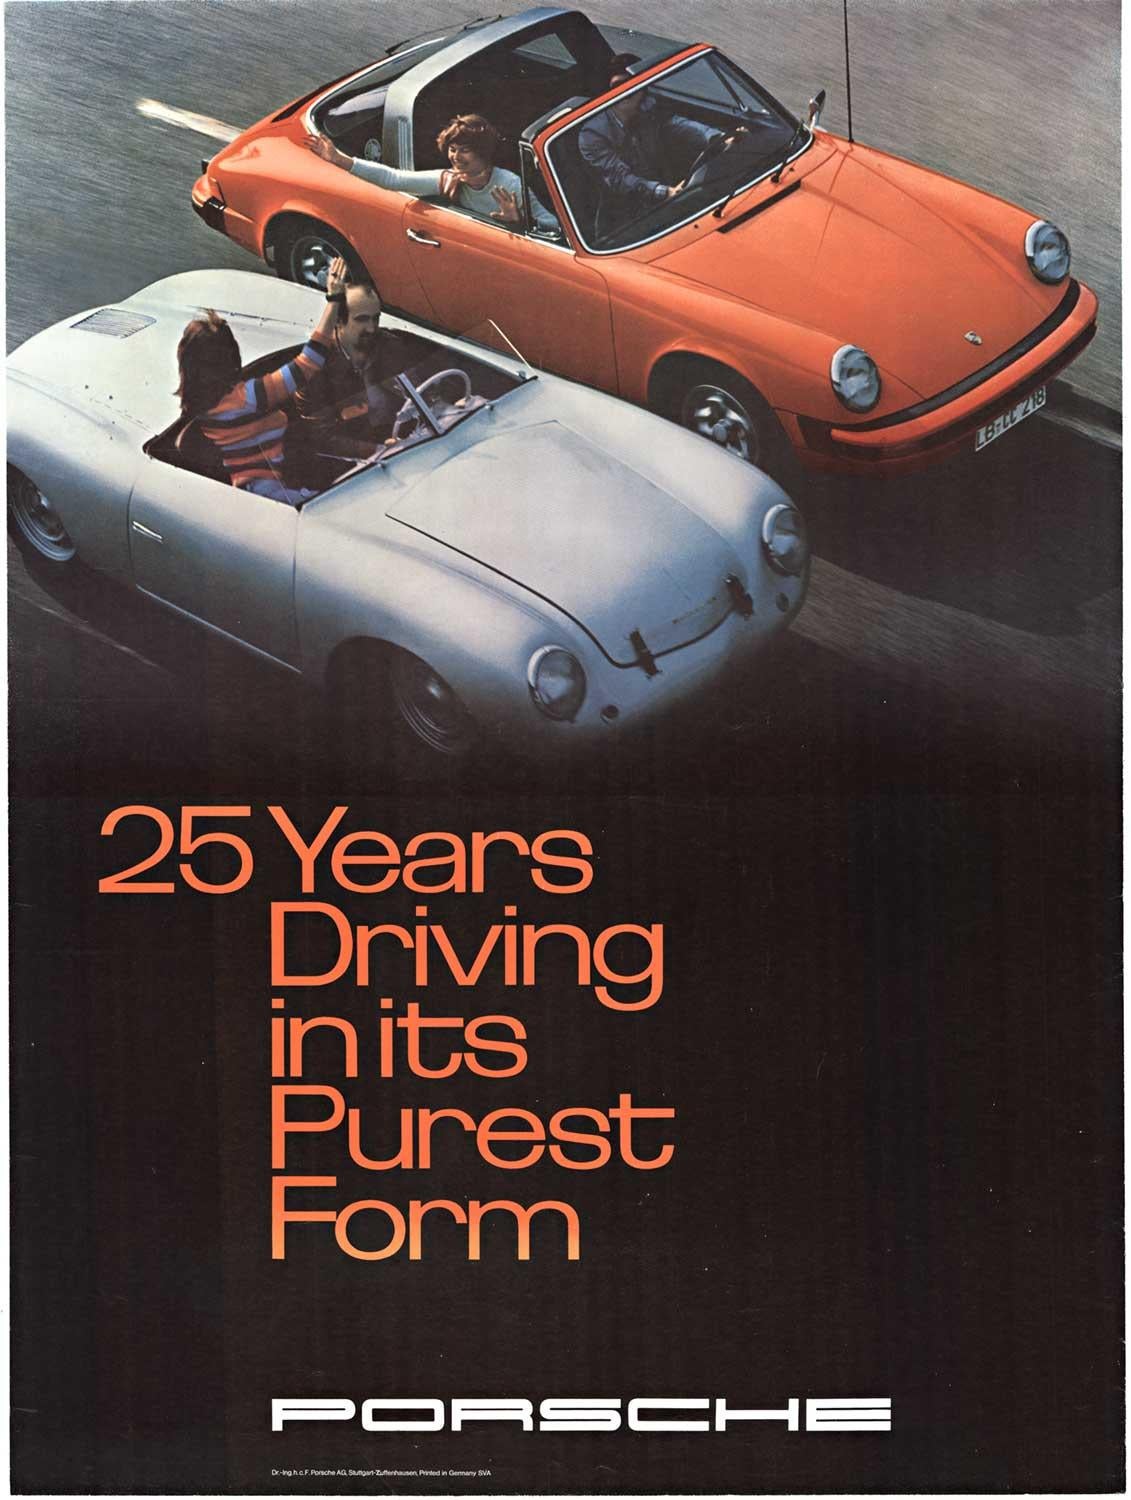 Unknown Print - Original Porsche '25 Years Driving in its Purest Form' vintage factory poster